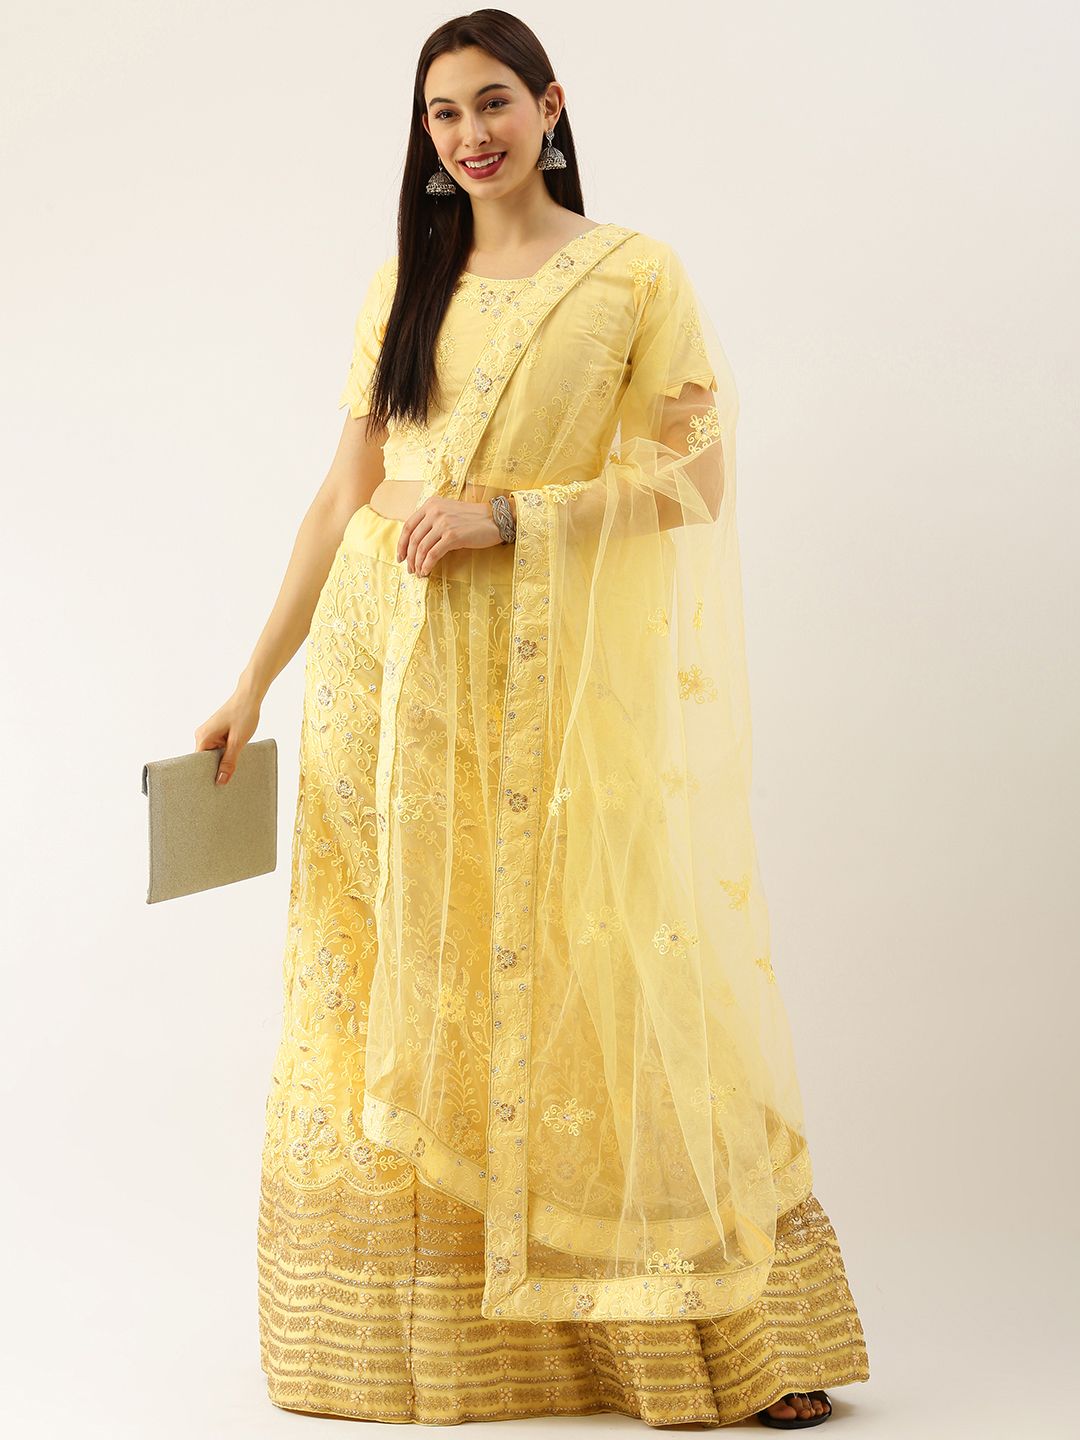 LADUSAA Yellow Embroidered Semi-Stitched Lehenga & Unstitched Blouse With Dupatta Price in India